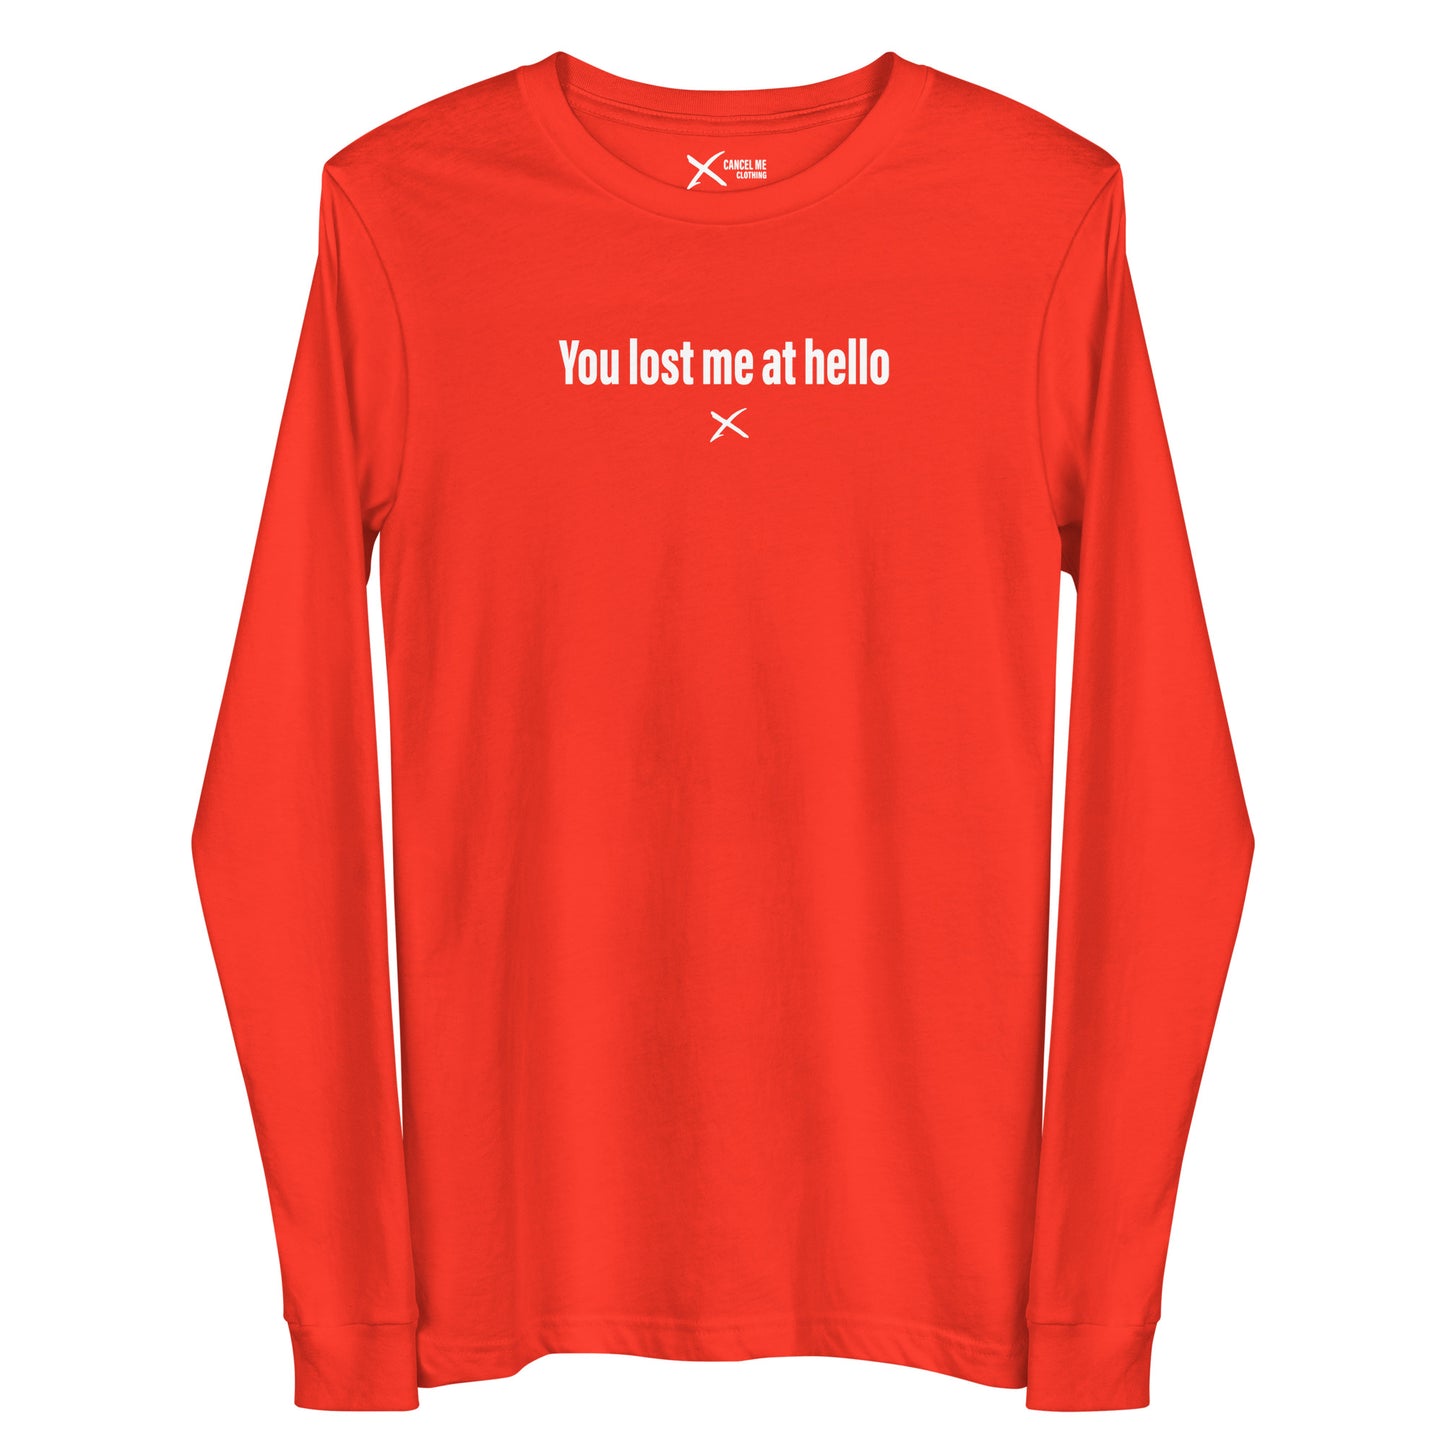 You lost me at hello - Longsleeve